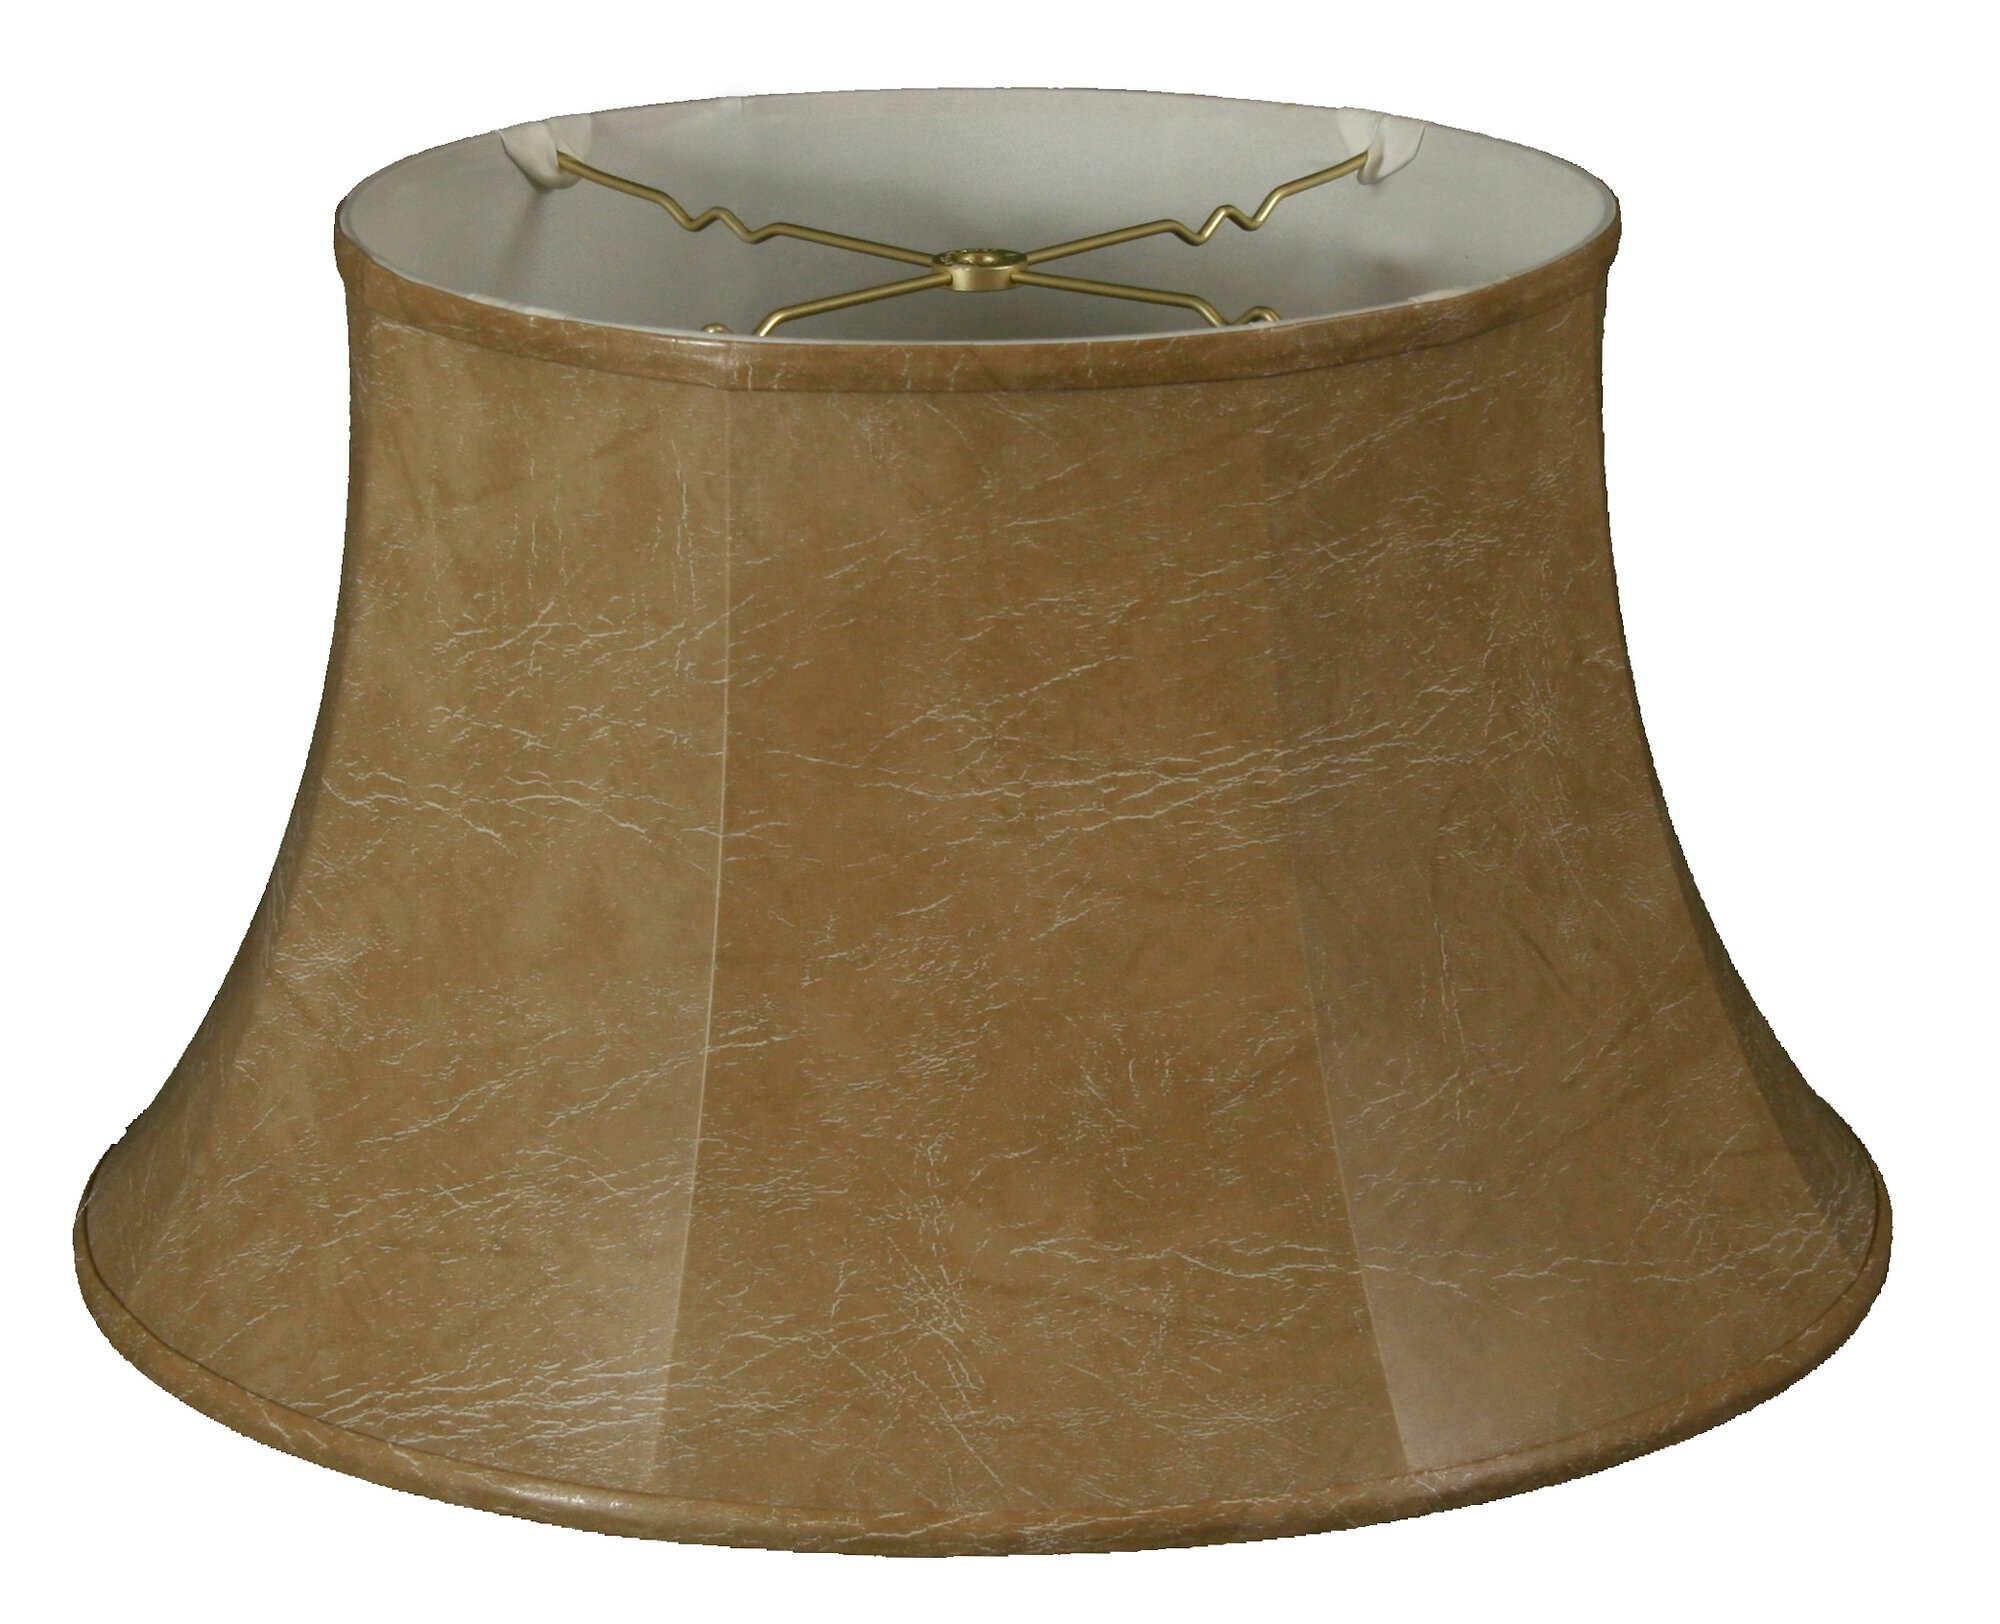 Alcott hill 17 faux leather bell lamp shade rdes1661 ebay